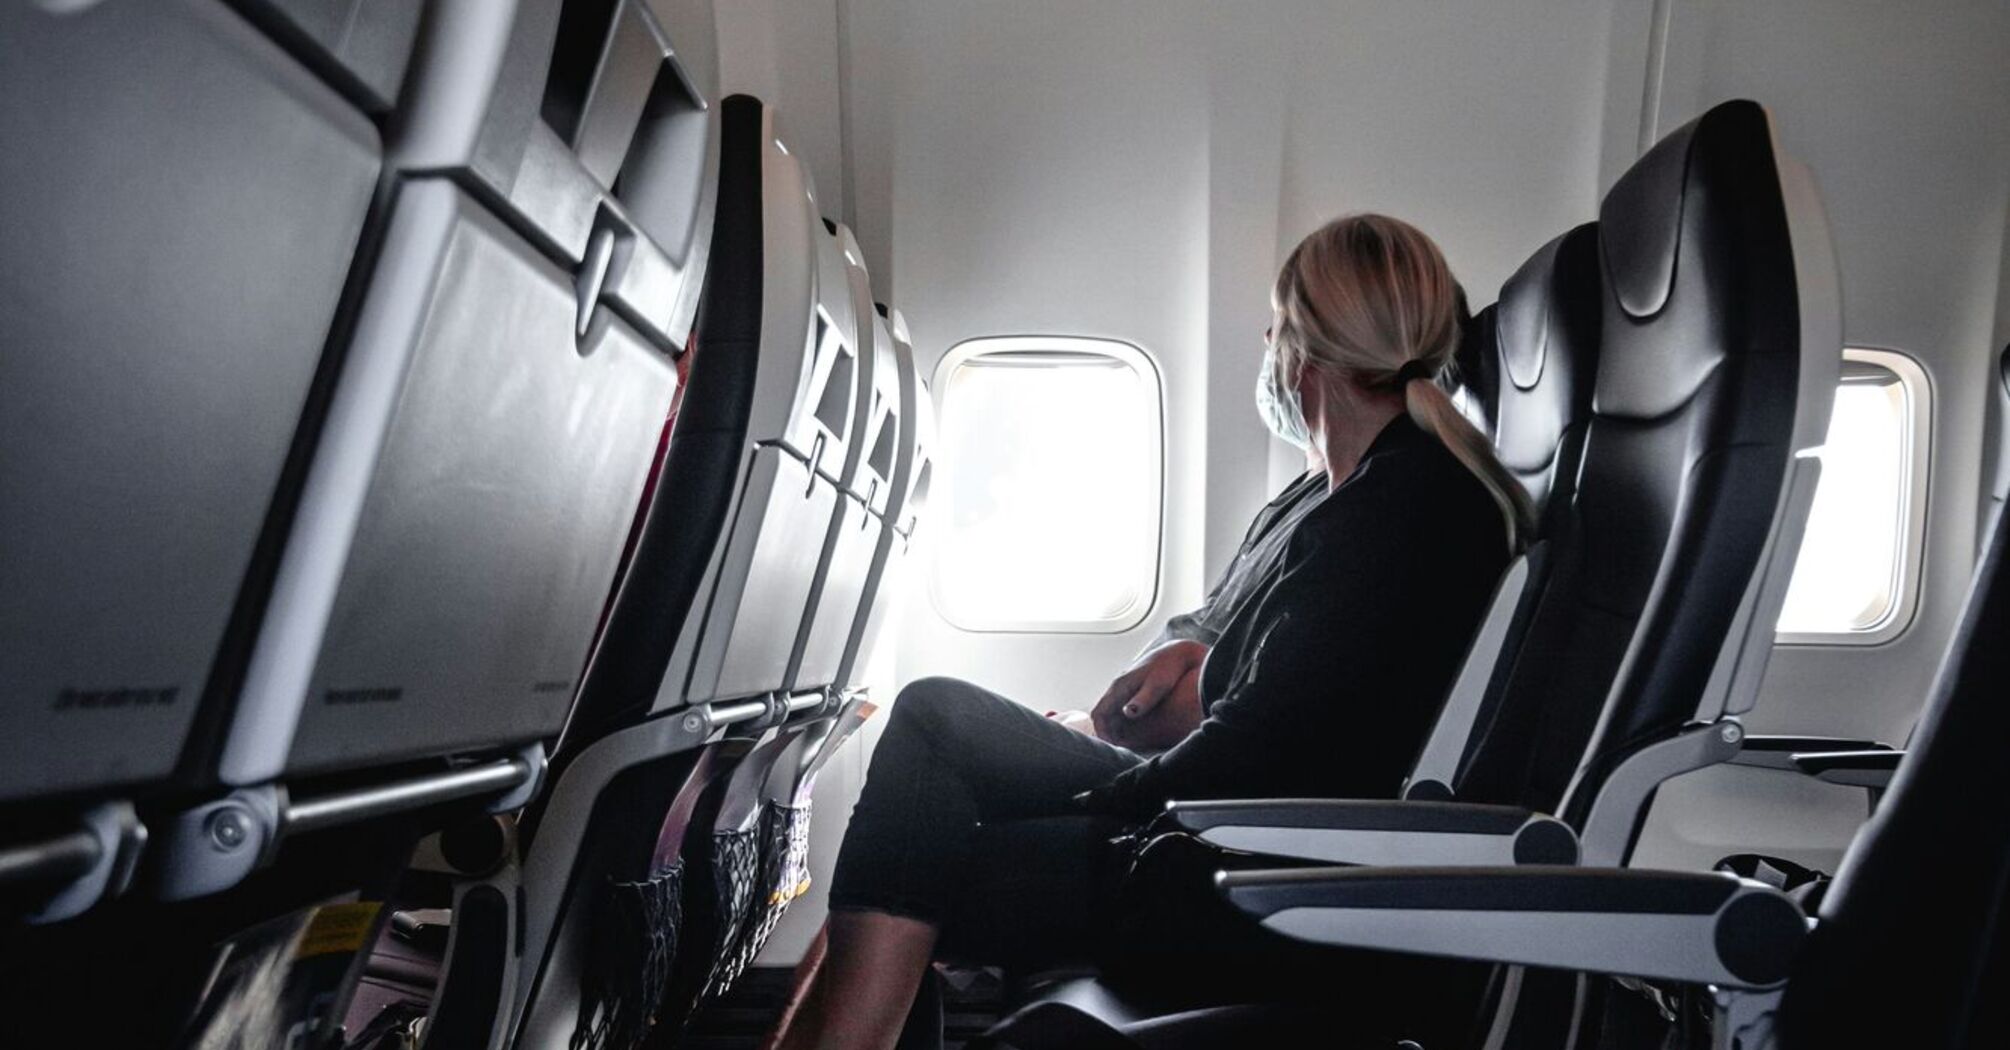 How to ask for an upgrade properly: Tips from flight attendants